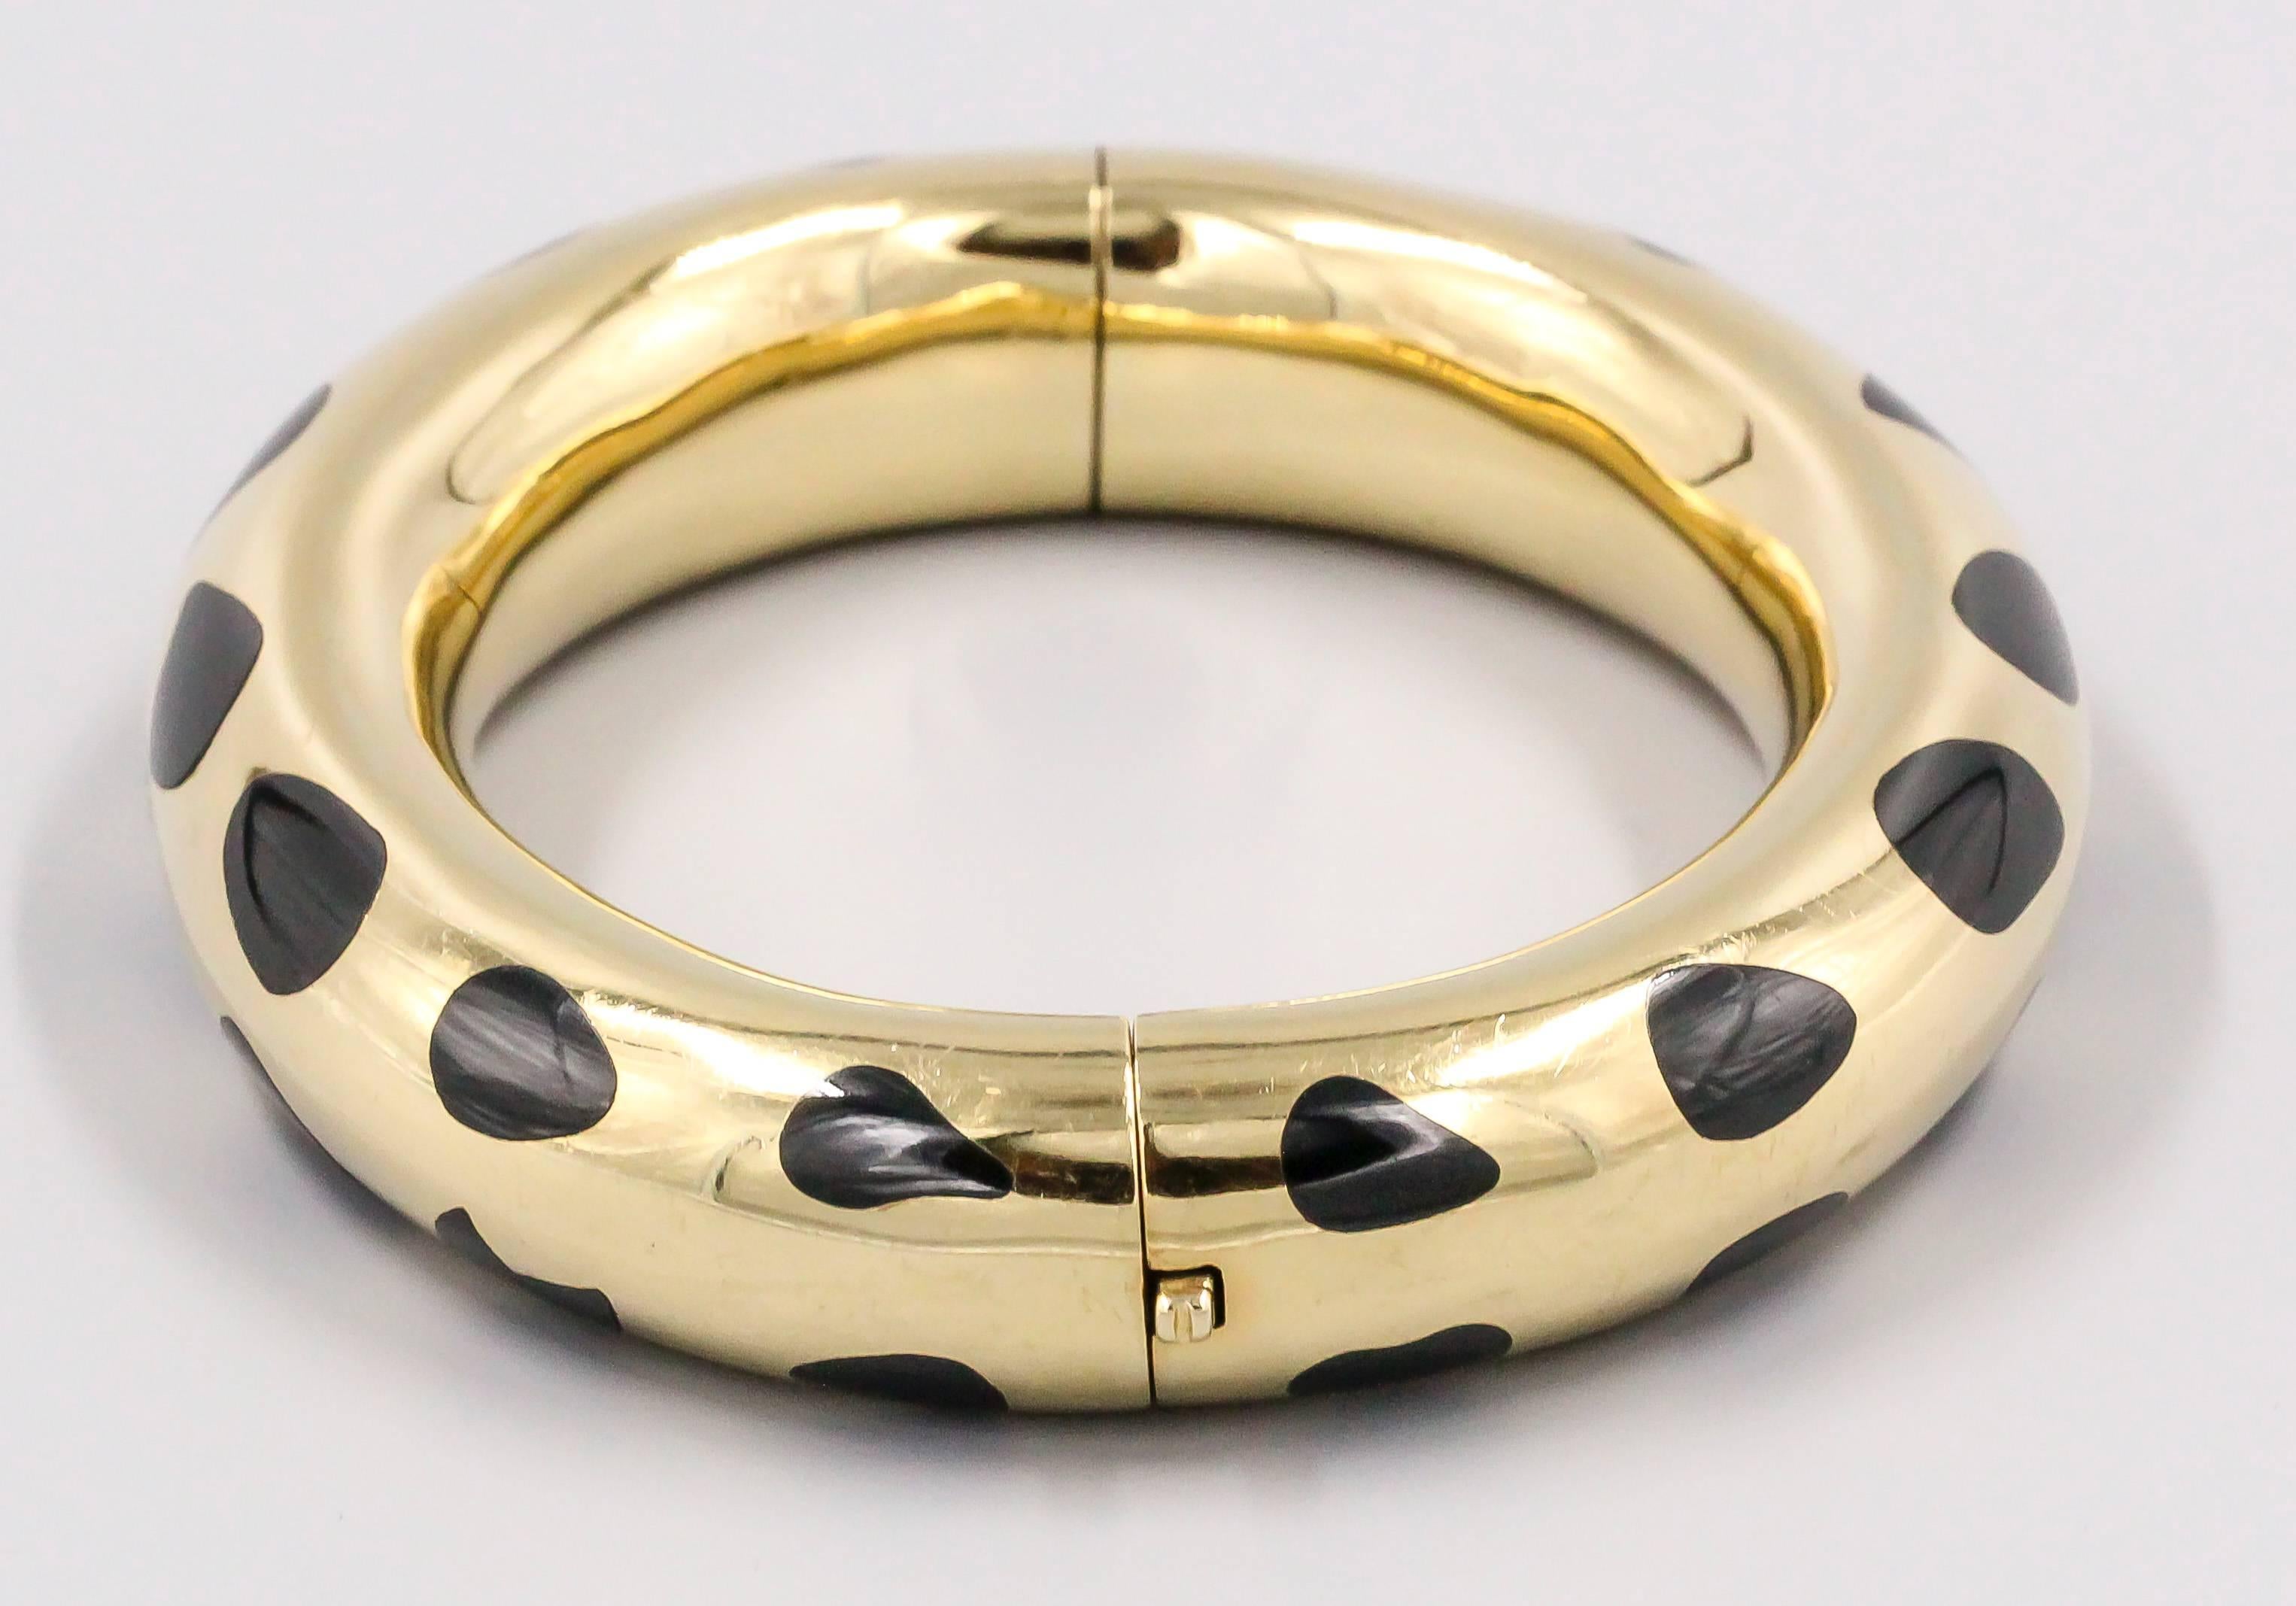 Elegant inlaid black jade and 18K gold bangle bracelet by Tiffany & Co. It features inlaid black jade spots of varying eclecting shapes over a gold base. Beautifully made, with push button opening. Angela Cummings is credited as the designer of this